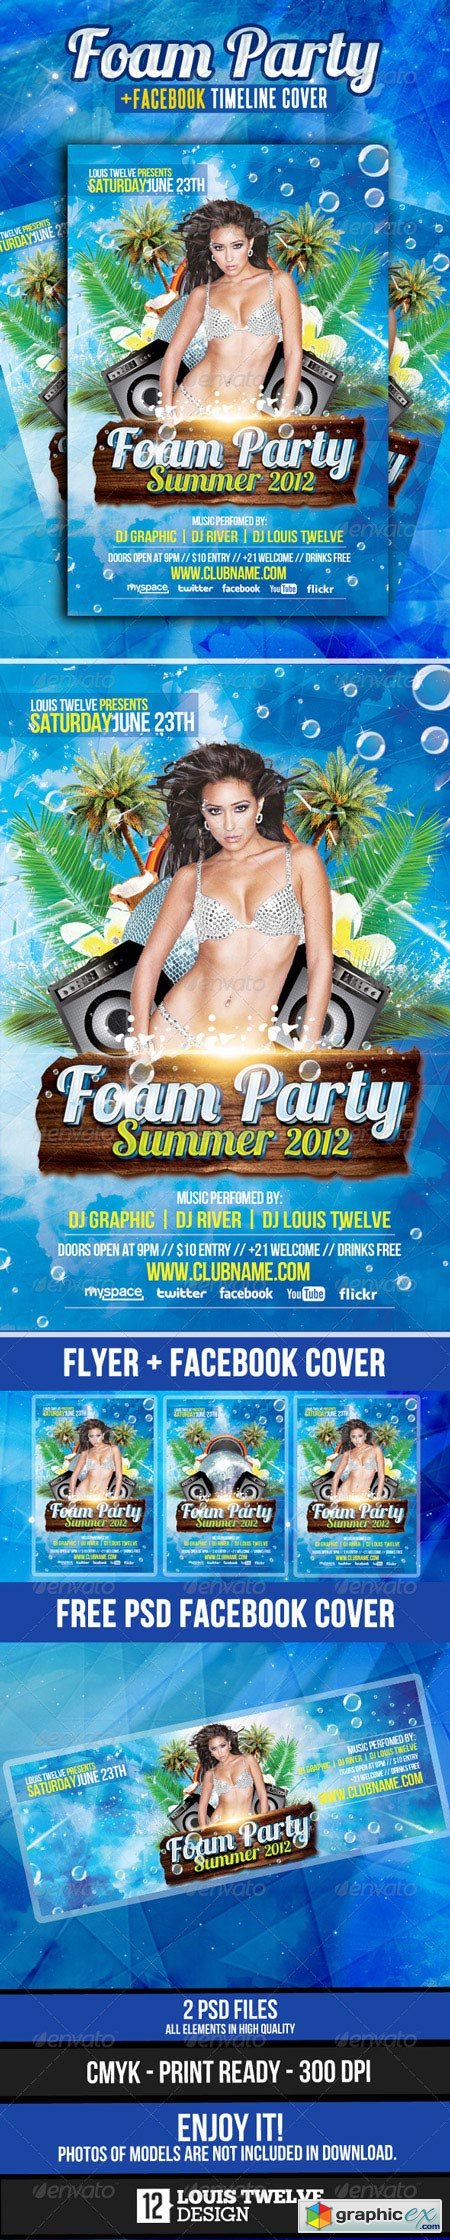 Foam Party Summer Flyer with Facebook Cover